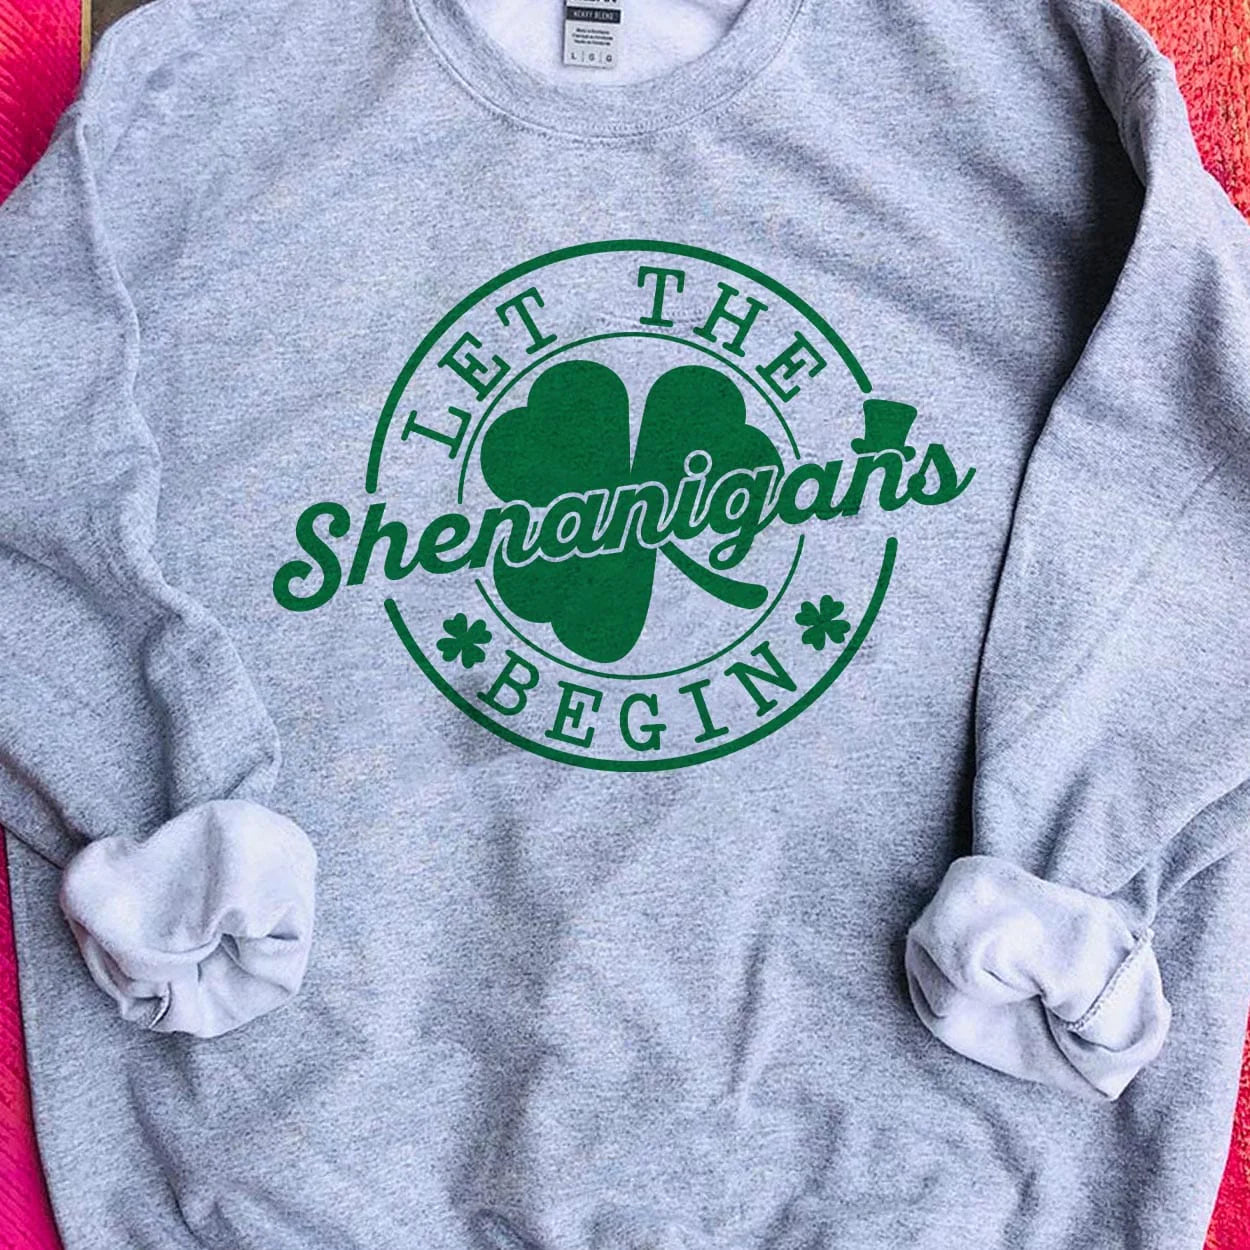 A gray crew neck sweatshirt featuring a large circular graphic saying "Let the shenanigans begin" in dark green with a clover behind "shenanigans" and little clovers before and after "begin". Item is pictured on a pink background